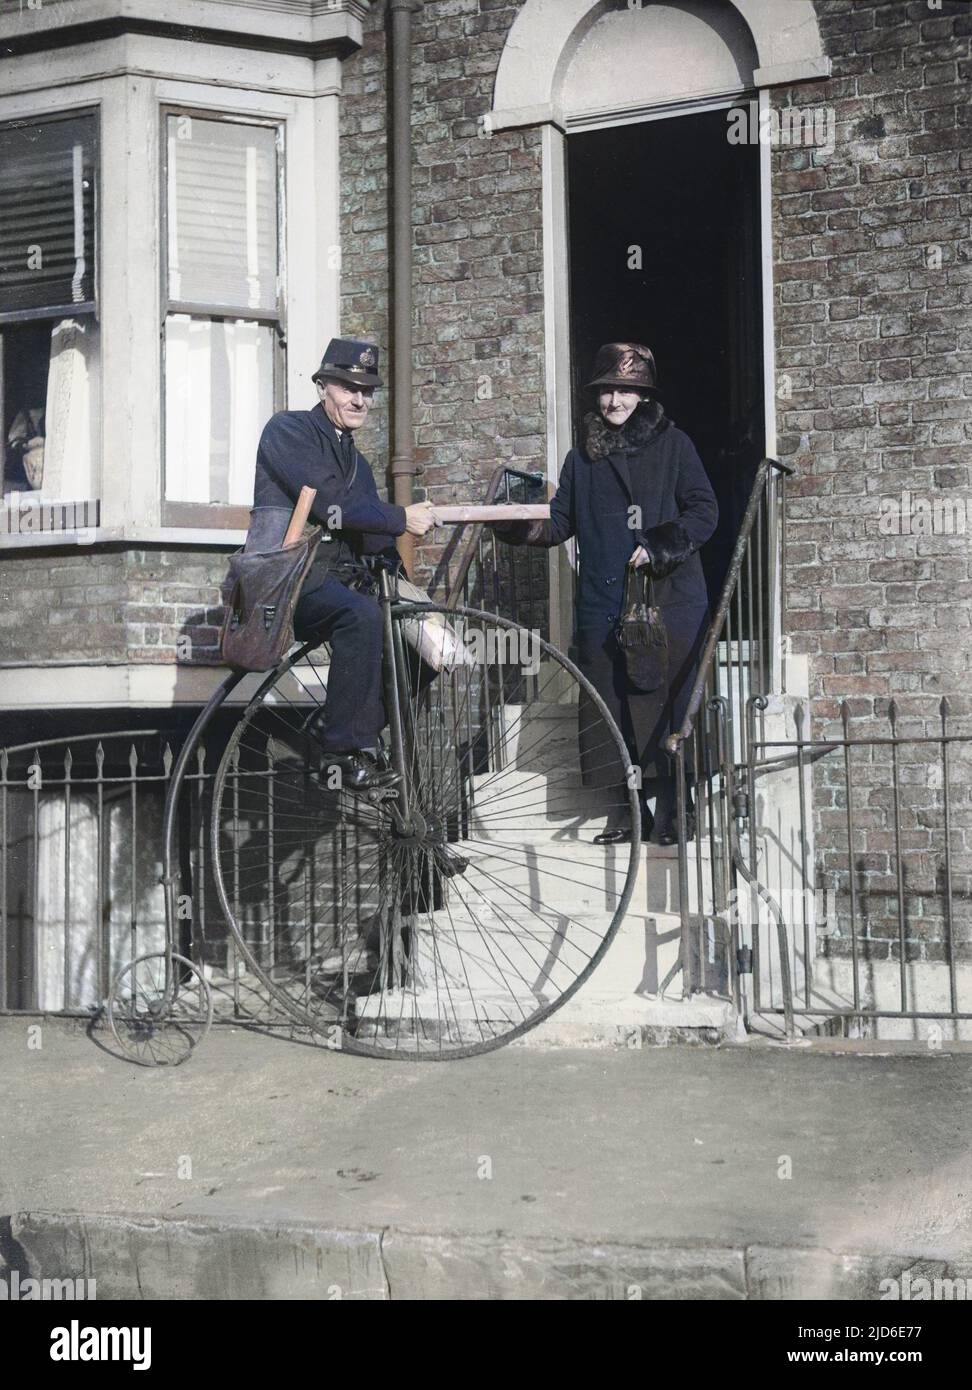 A postman on a penny farthing delivers a parcel to a woman dressed in a long coat with fur trim Colourised version of : 10092099       Date: 1930 Stock Photo